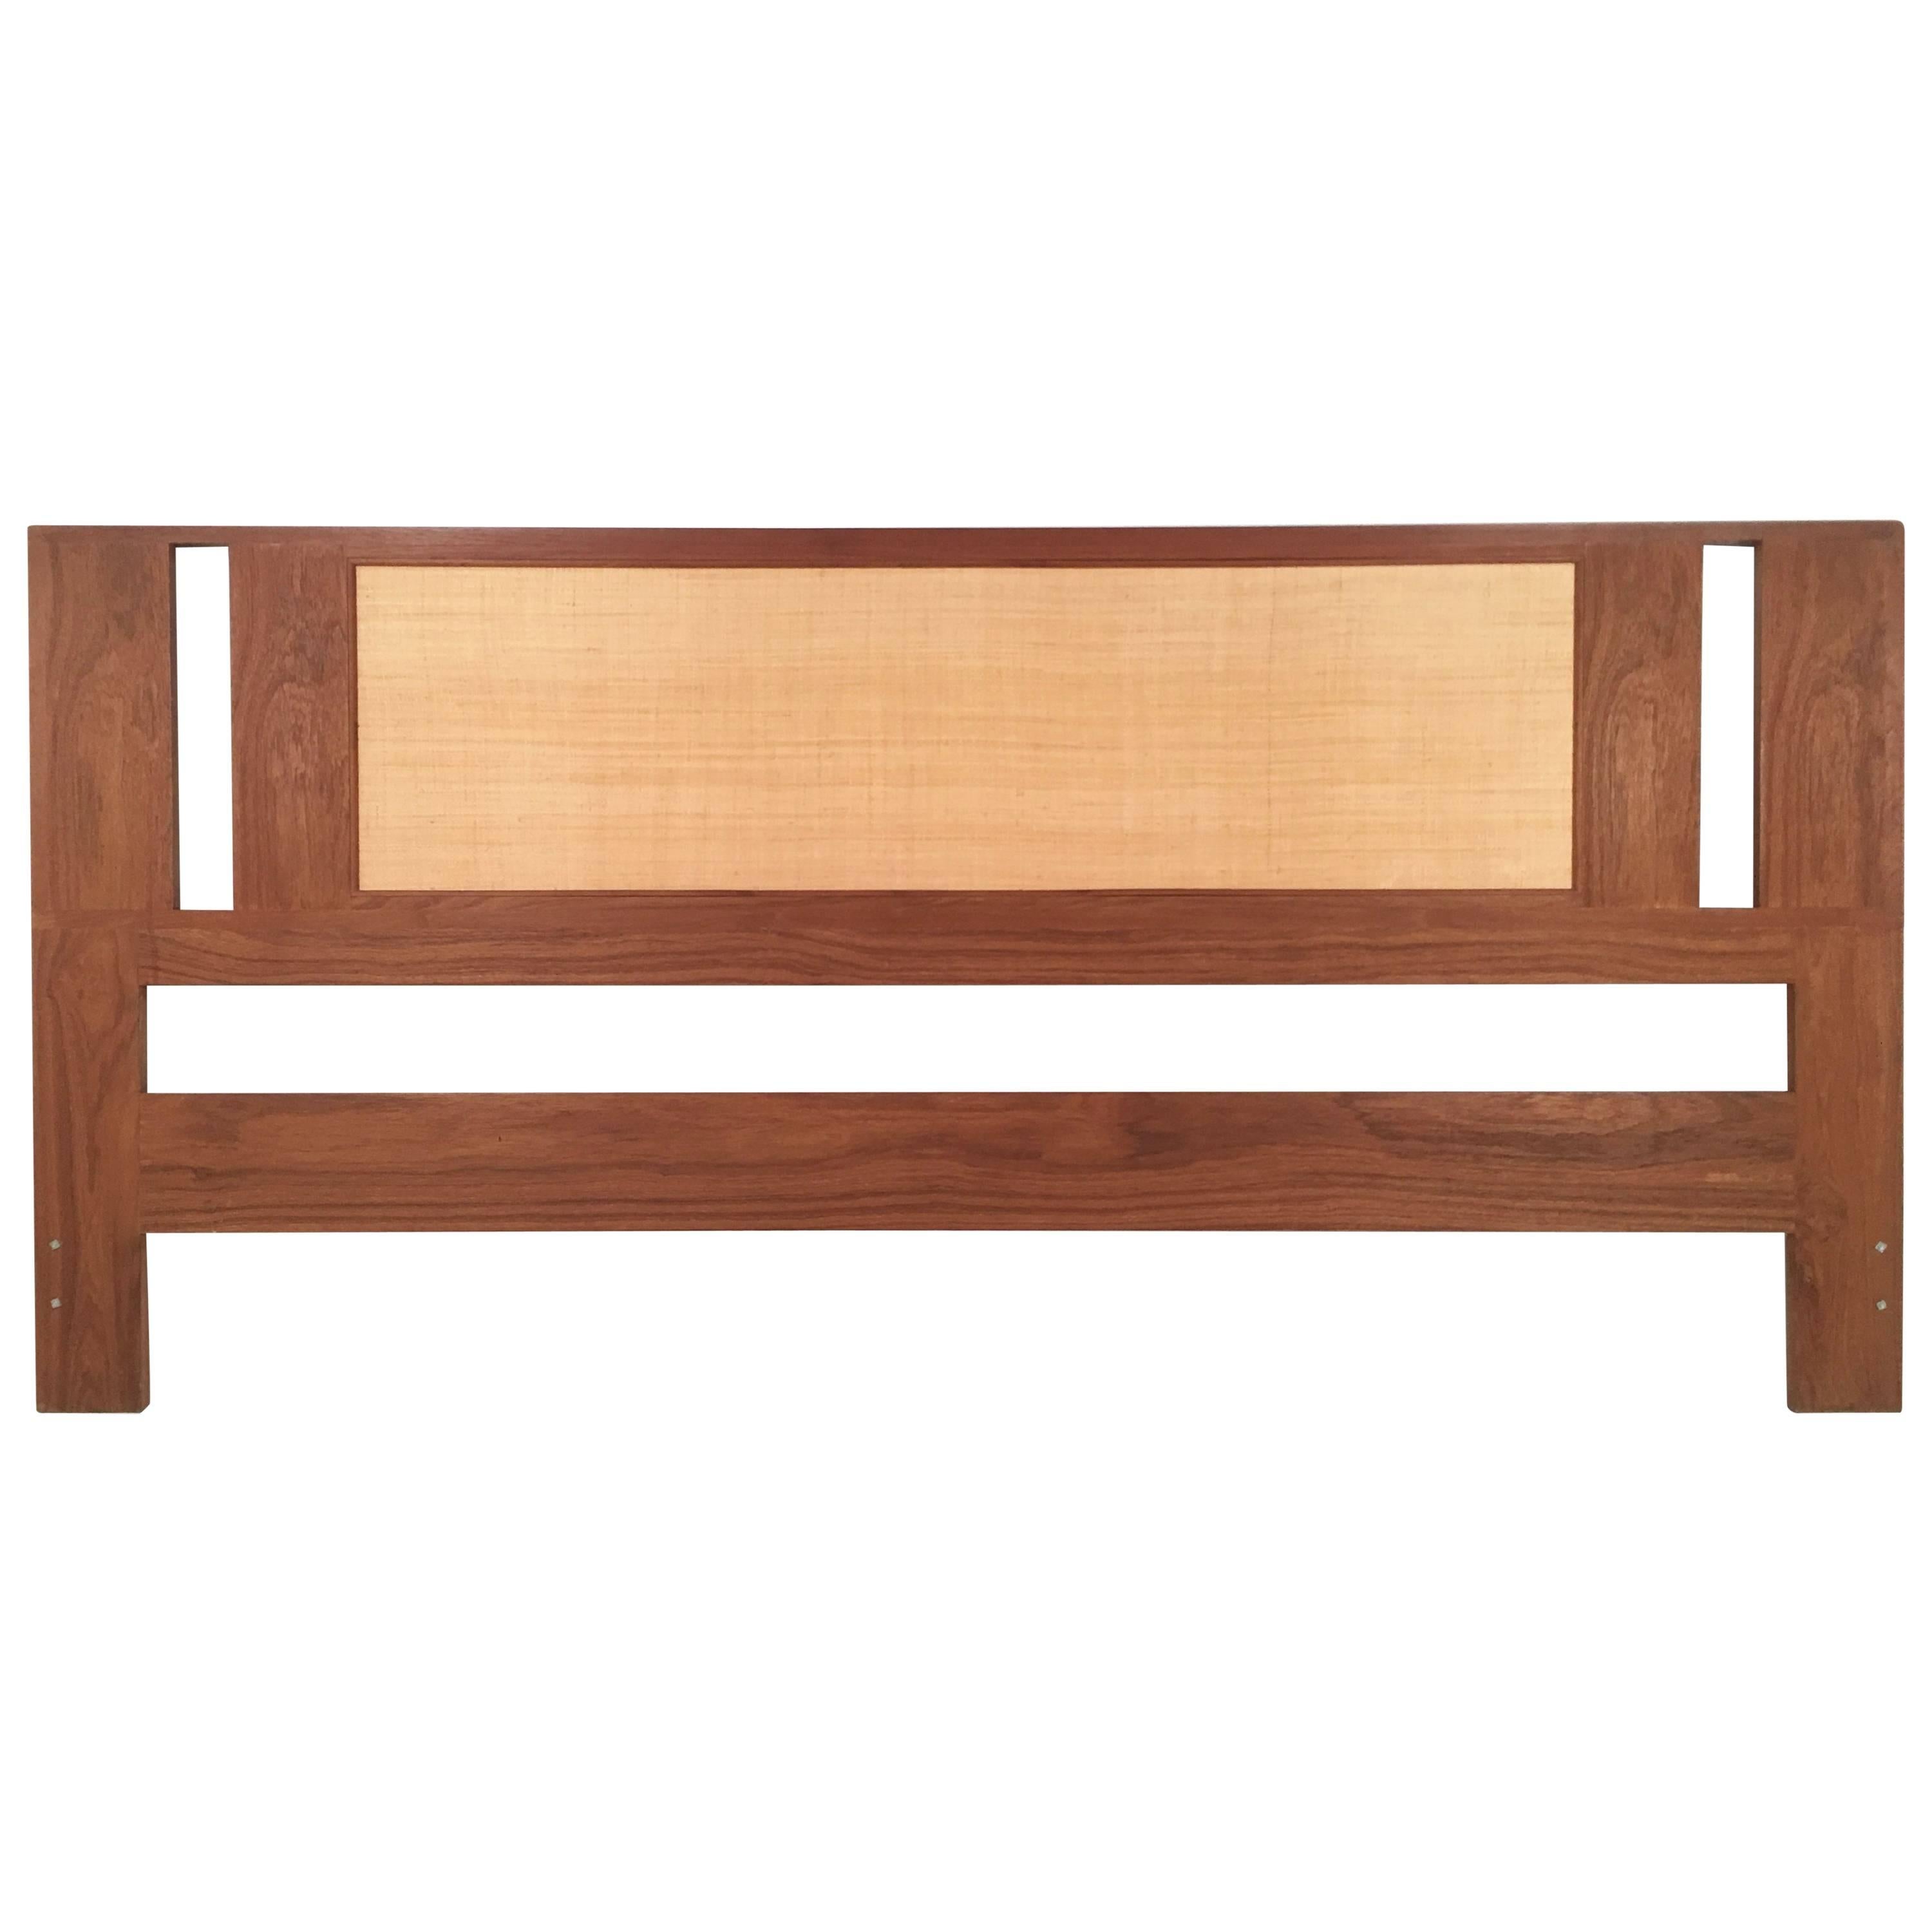 Danish Teak and Grass Cloth Double Sided King-Size Headboard by Falster